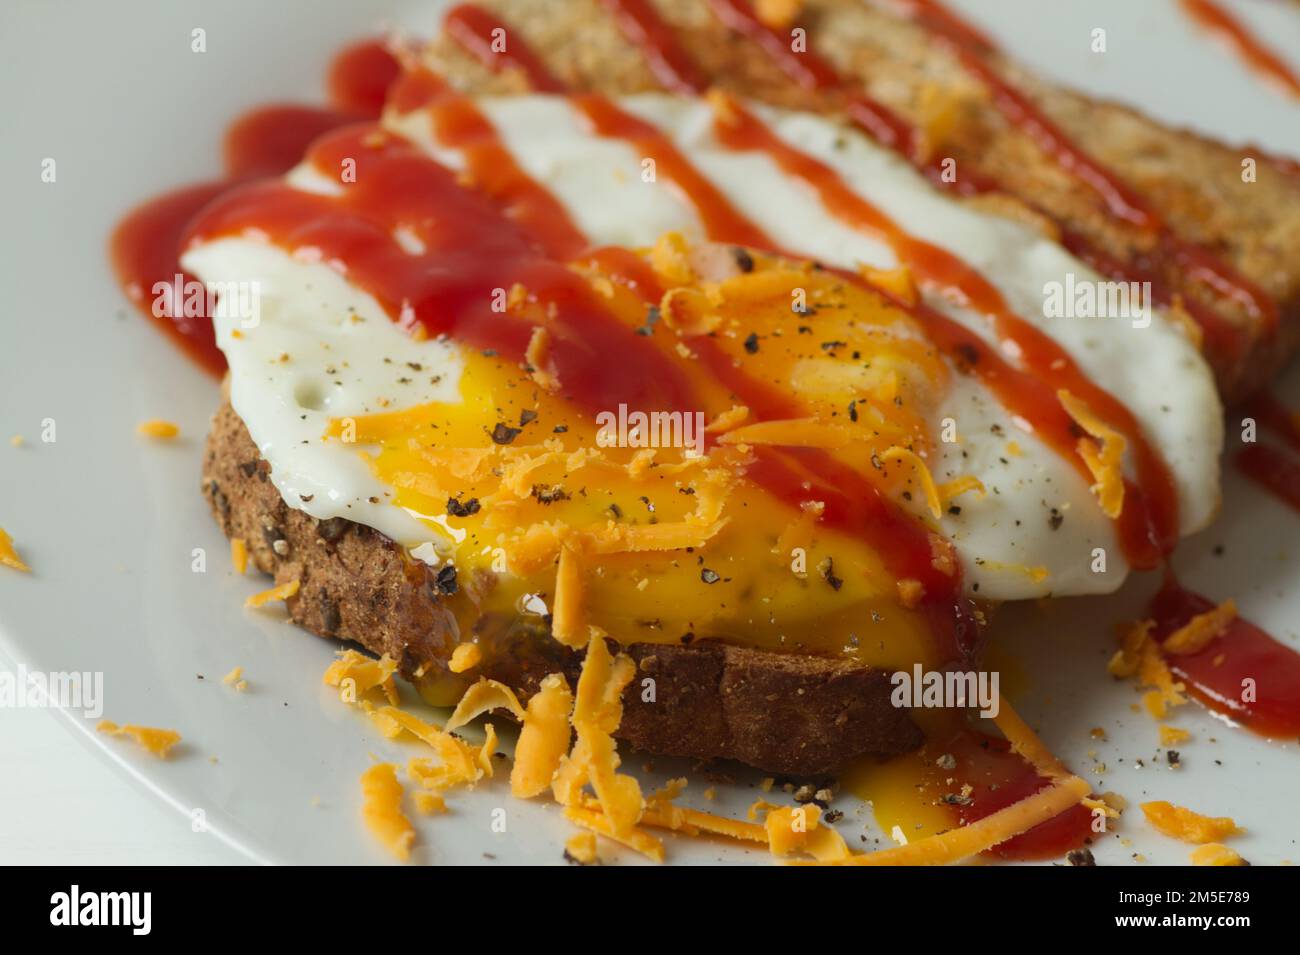 Fried egg on a slice of toasted seeded bread with black pepper, Red Leicester cheese and tomato ketchup on top Stock Photo